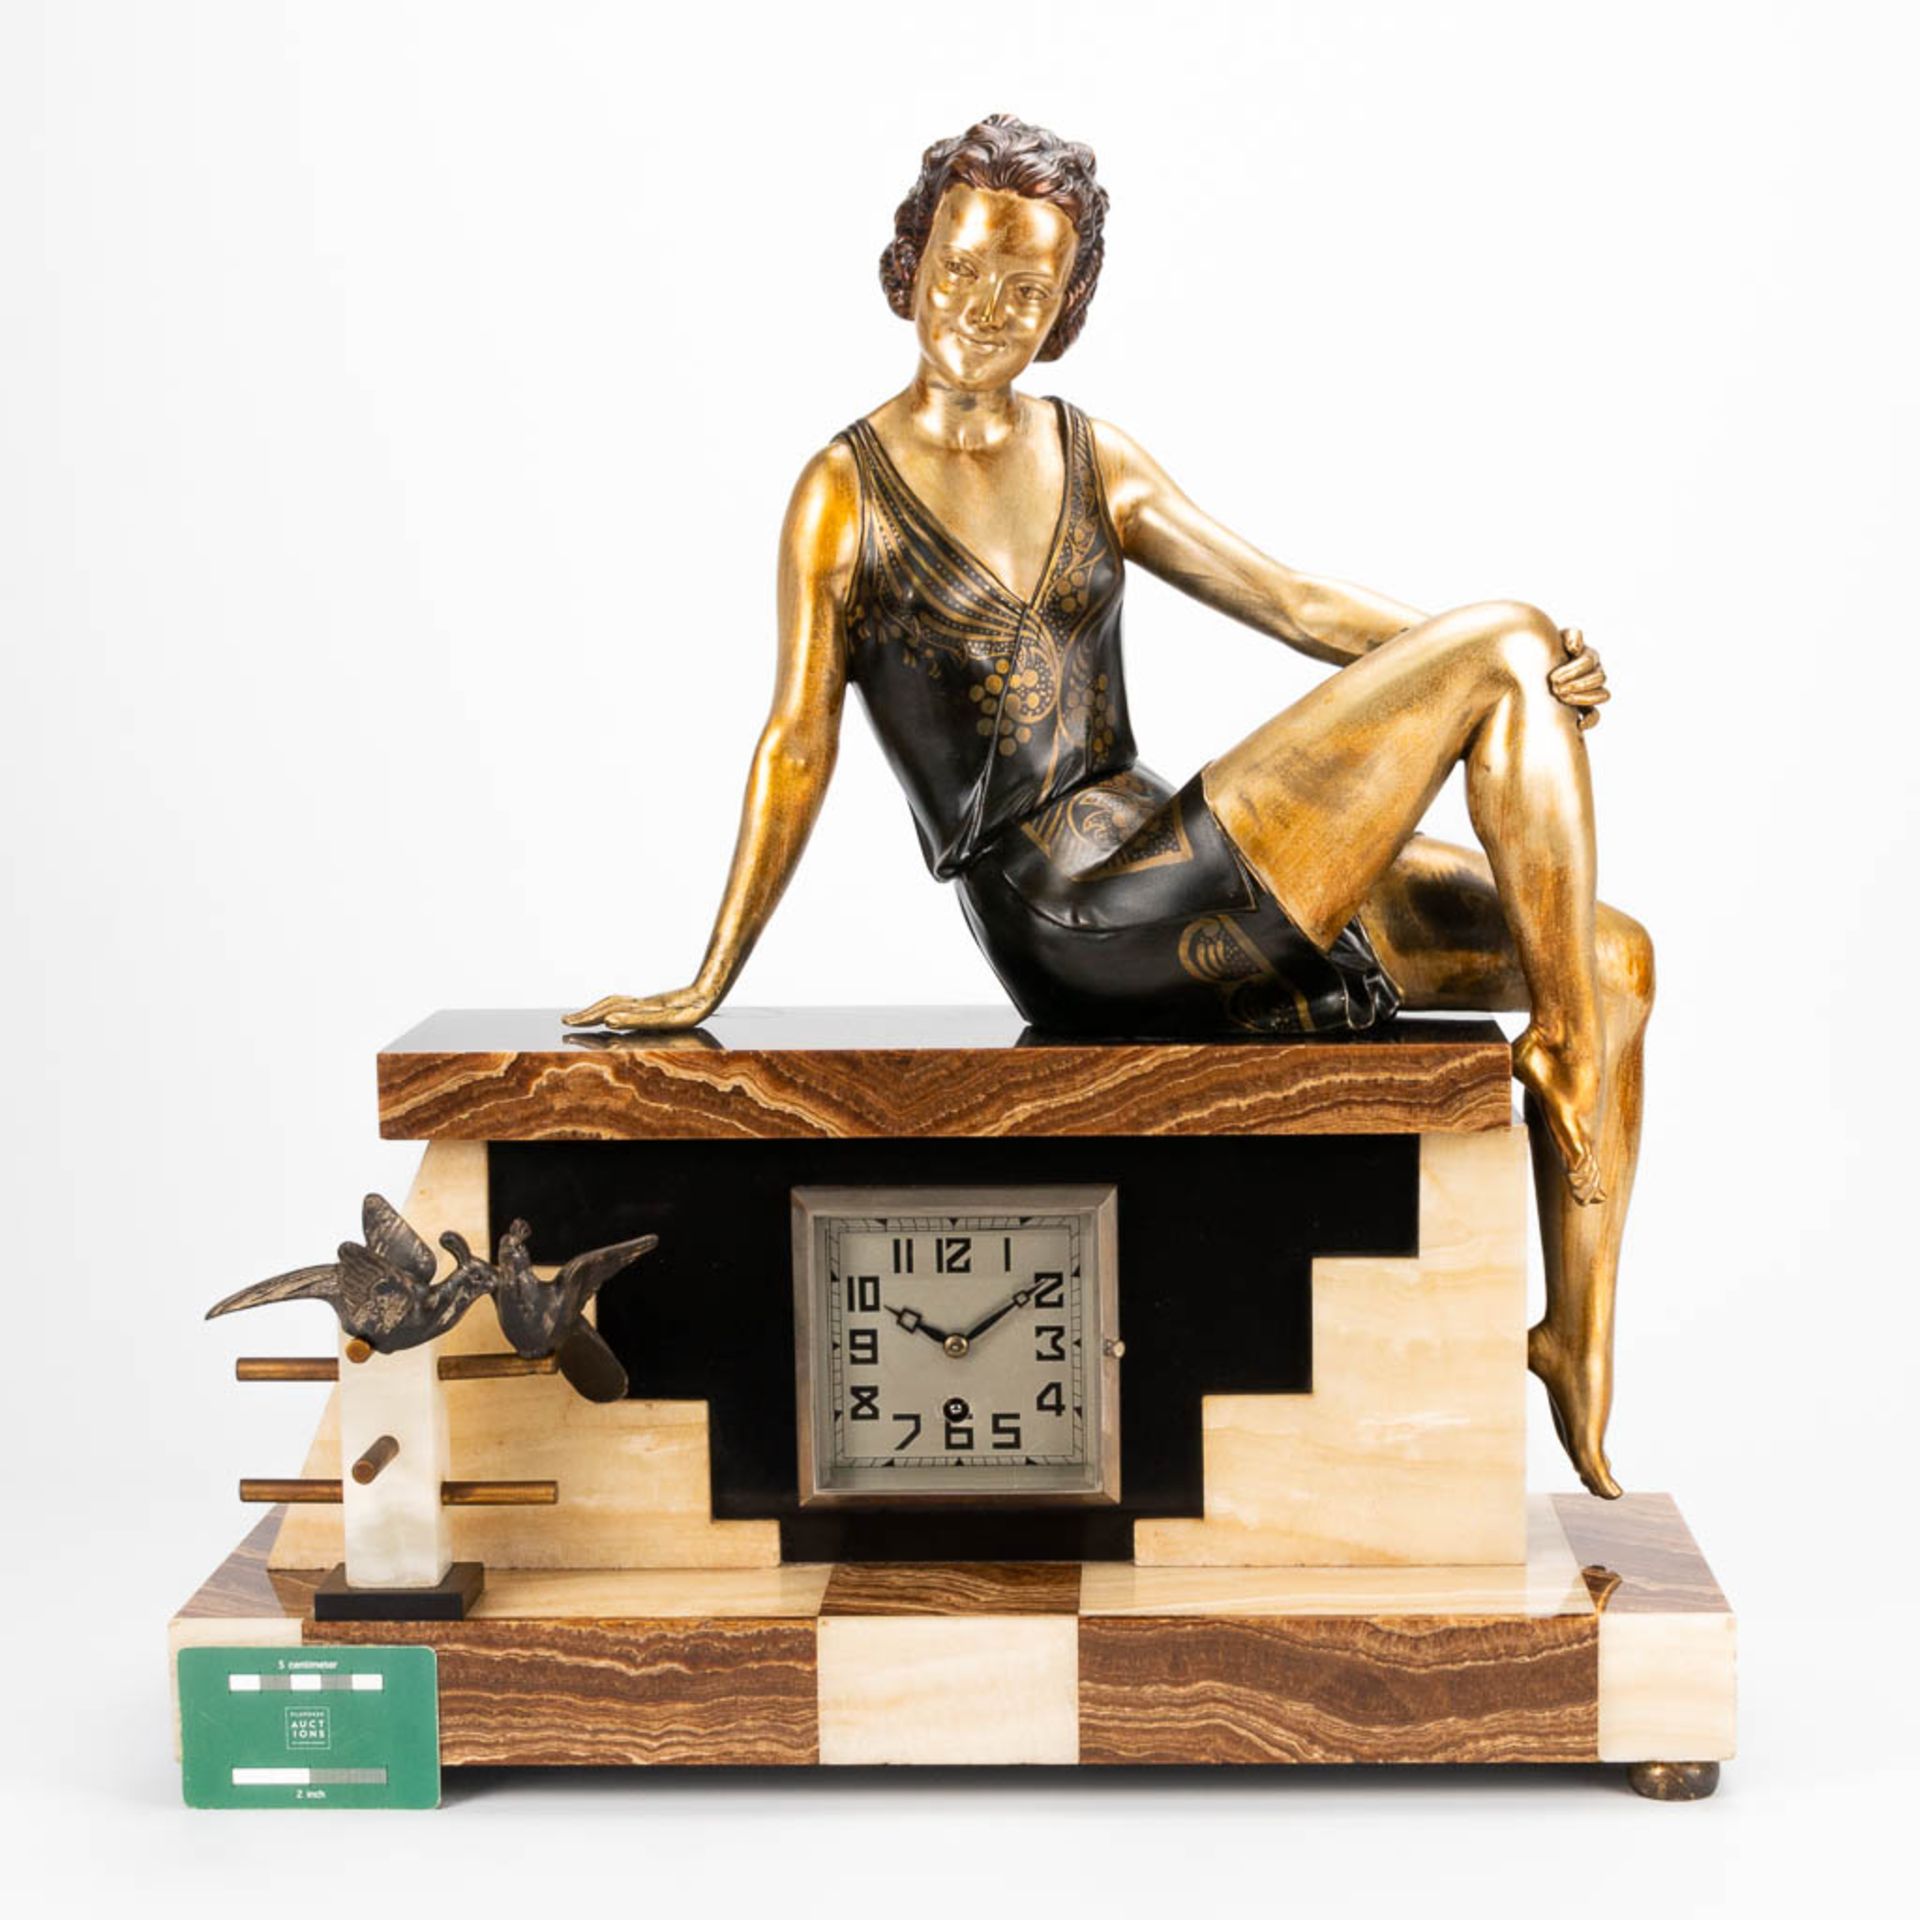 Enrique MOLINS-BALLESTE (1893-1958) A clock made of alabaster and onyx in Art Deco style, with a spe - Image 9 of 11